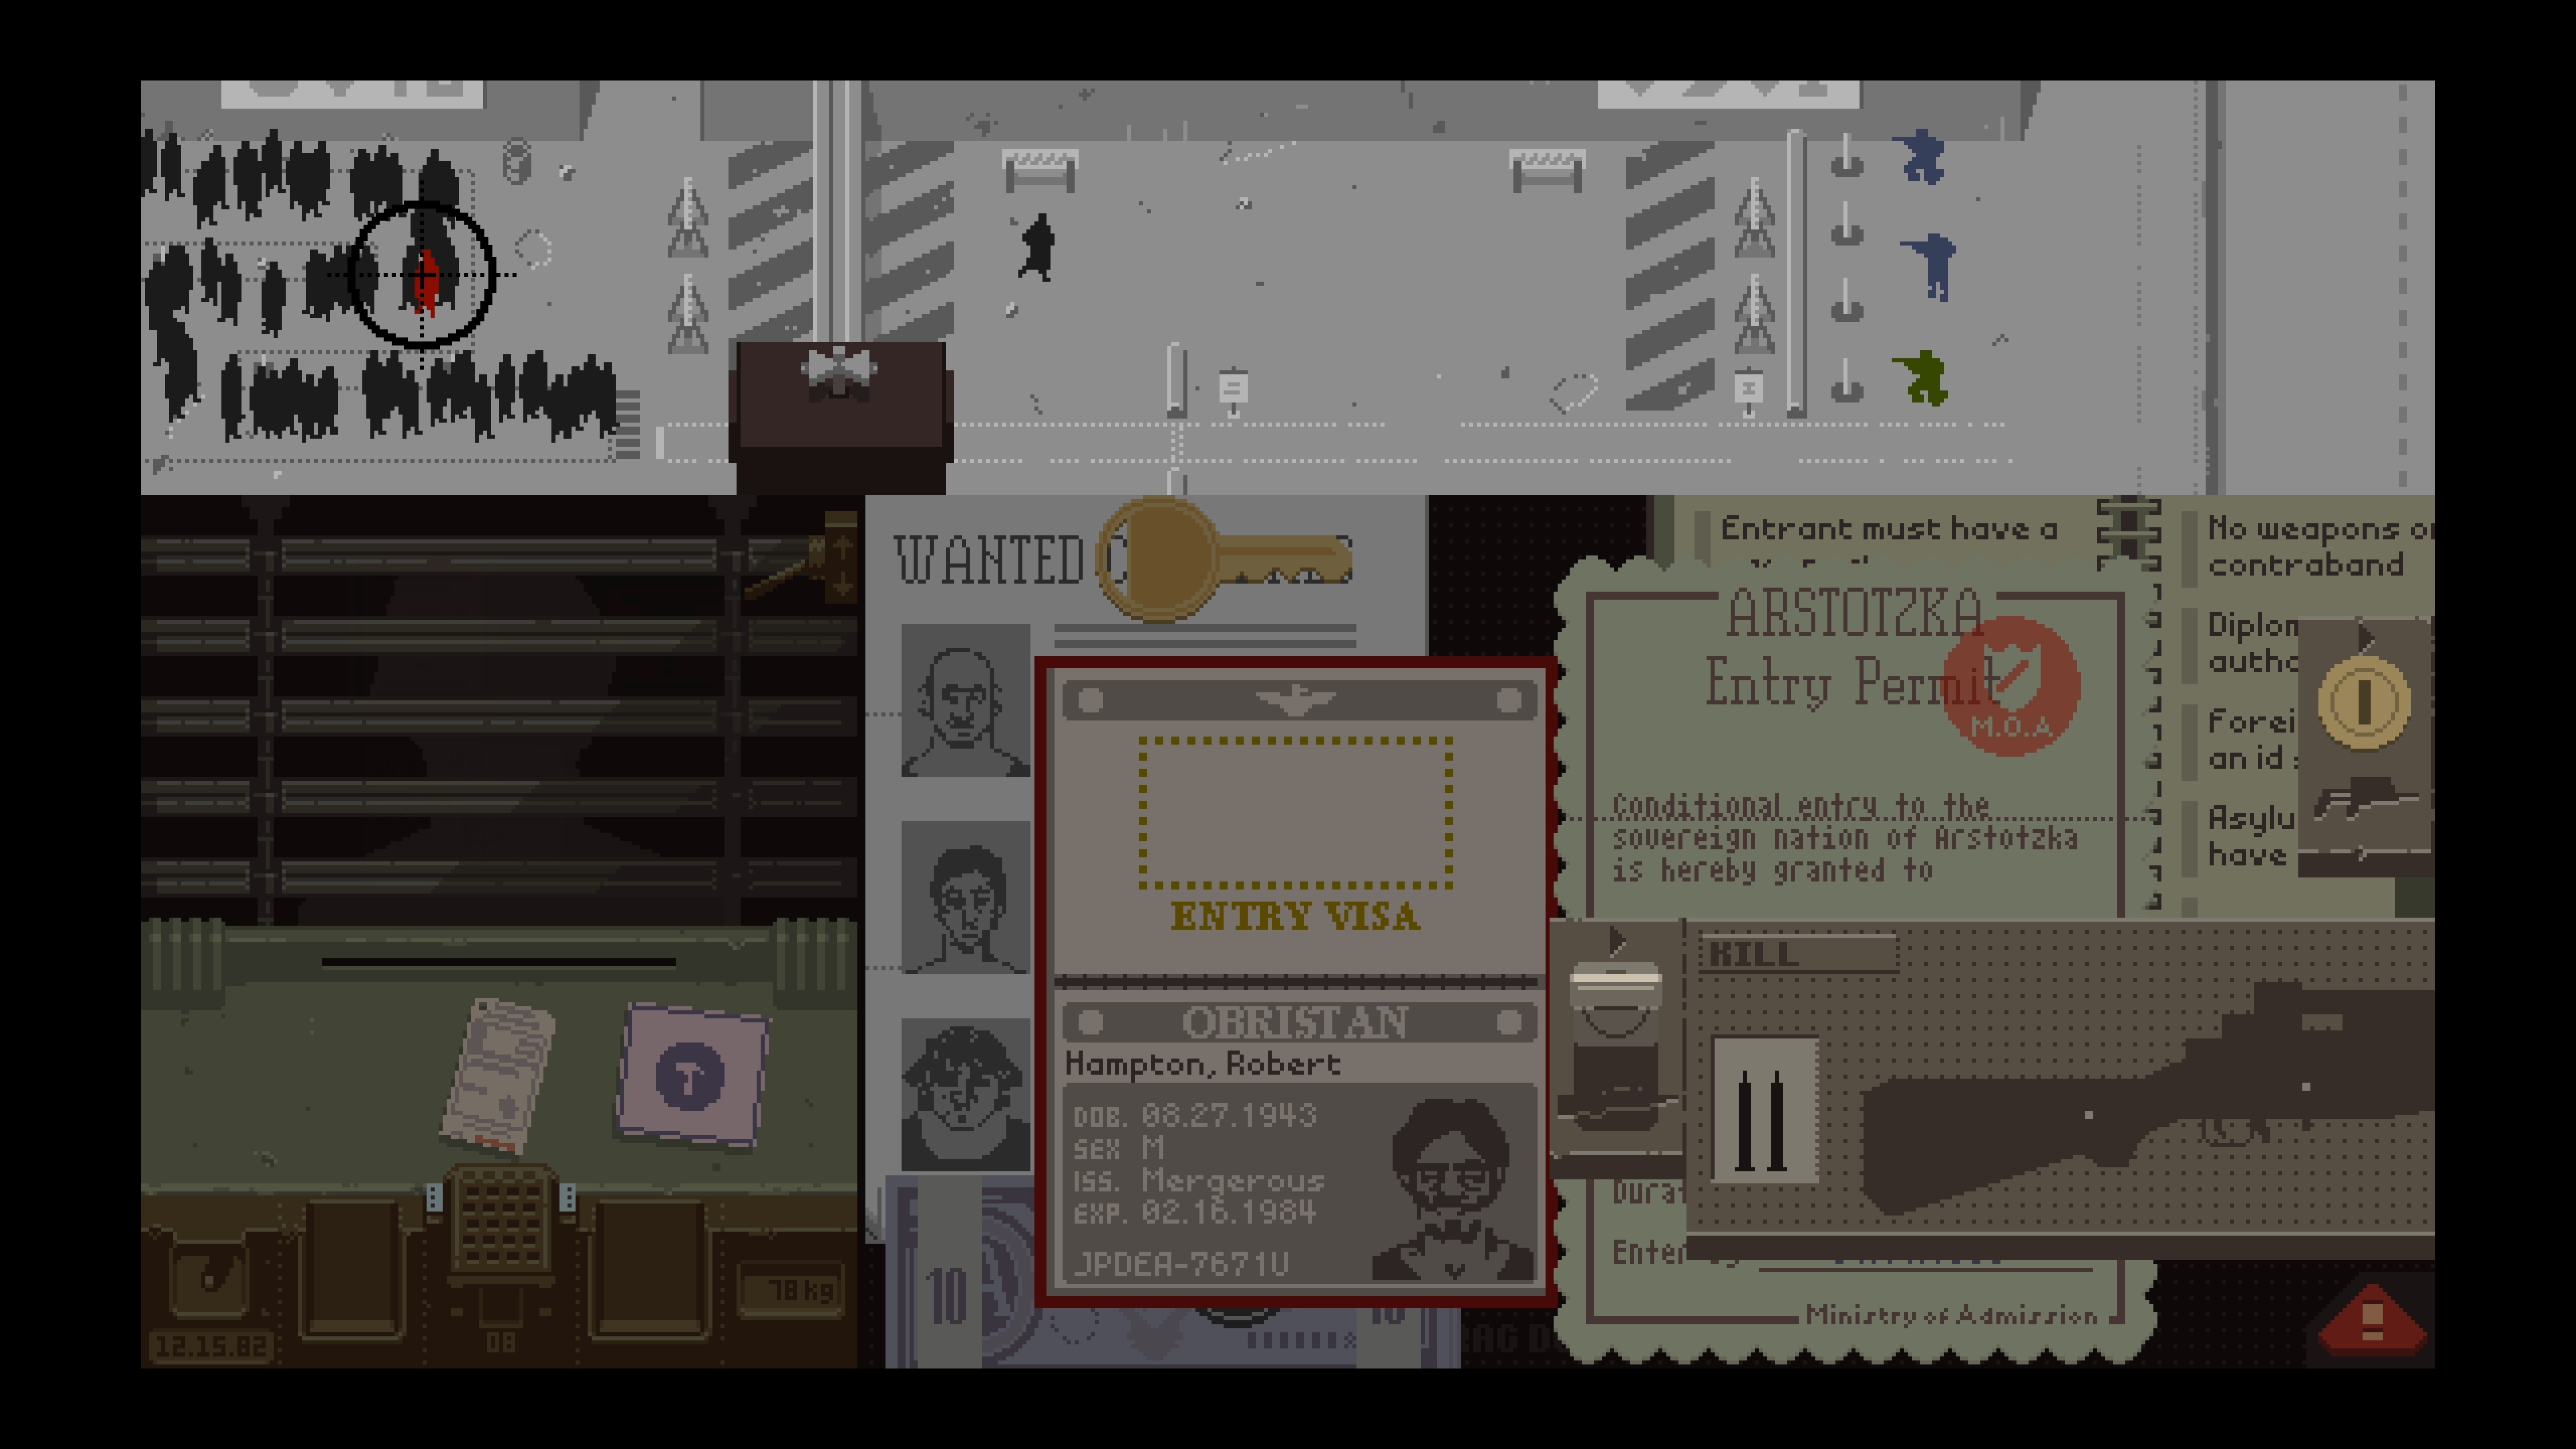 Steam Papers, Please 100% Achievement : r/papersplease